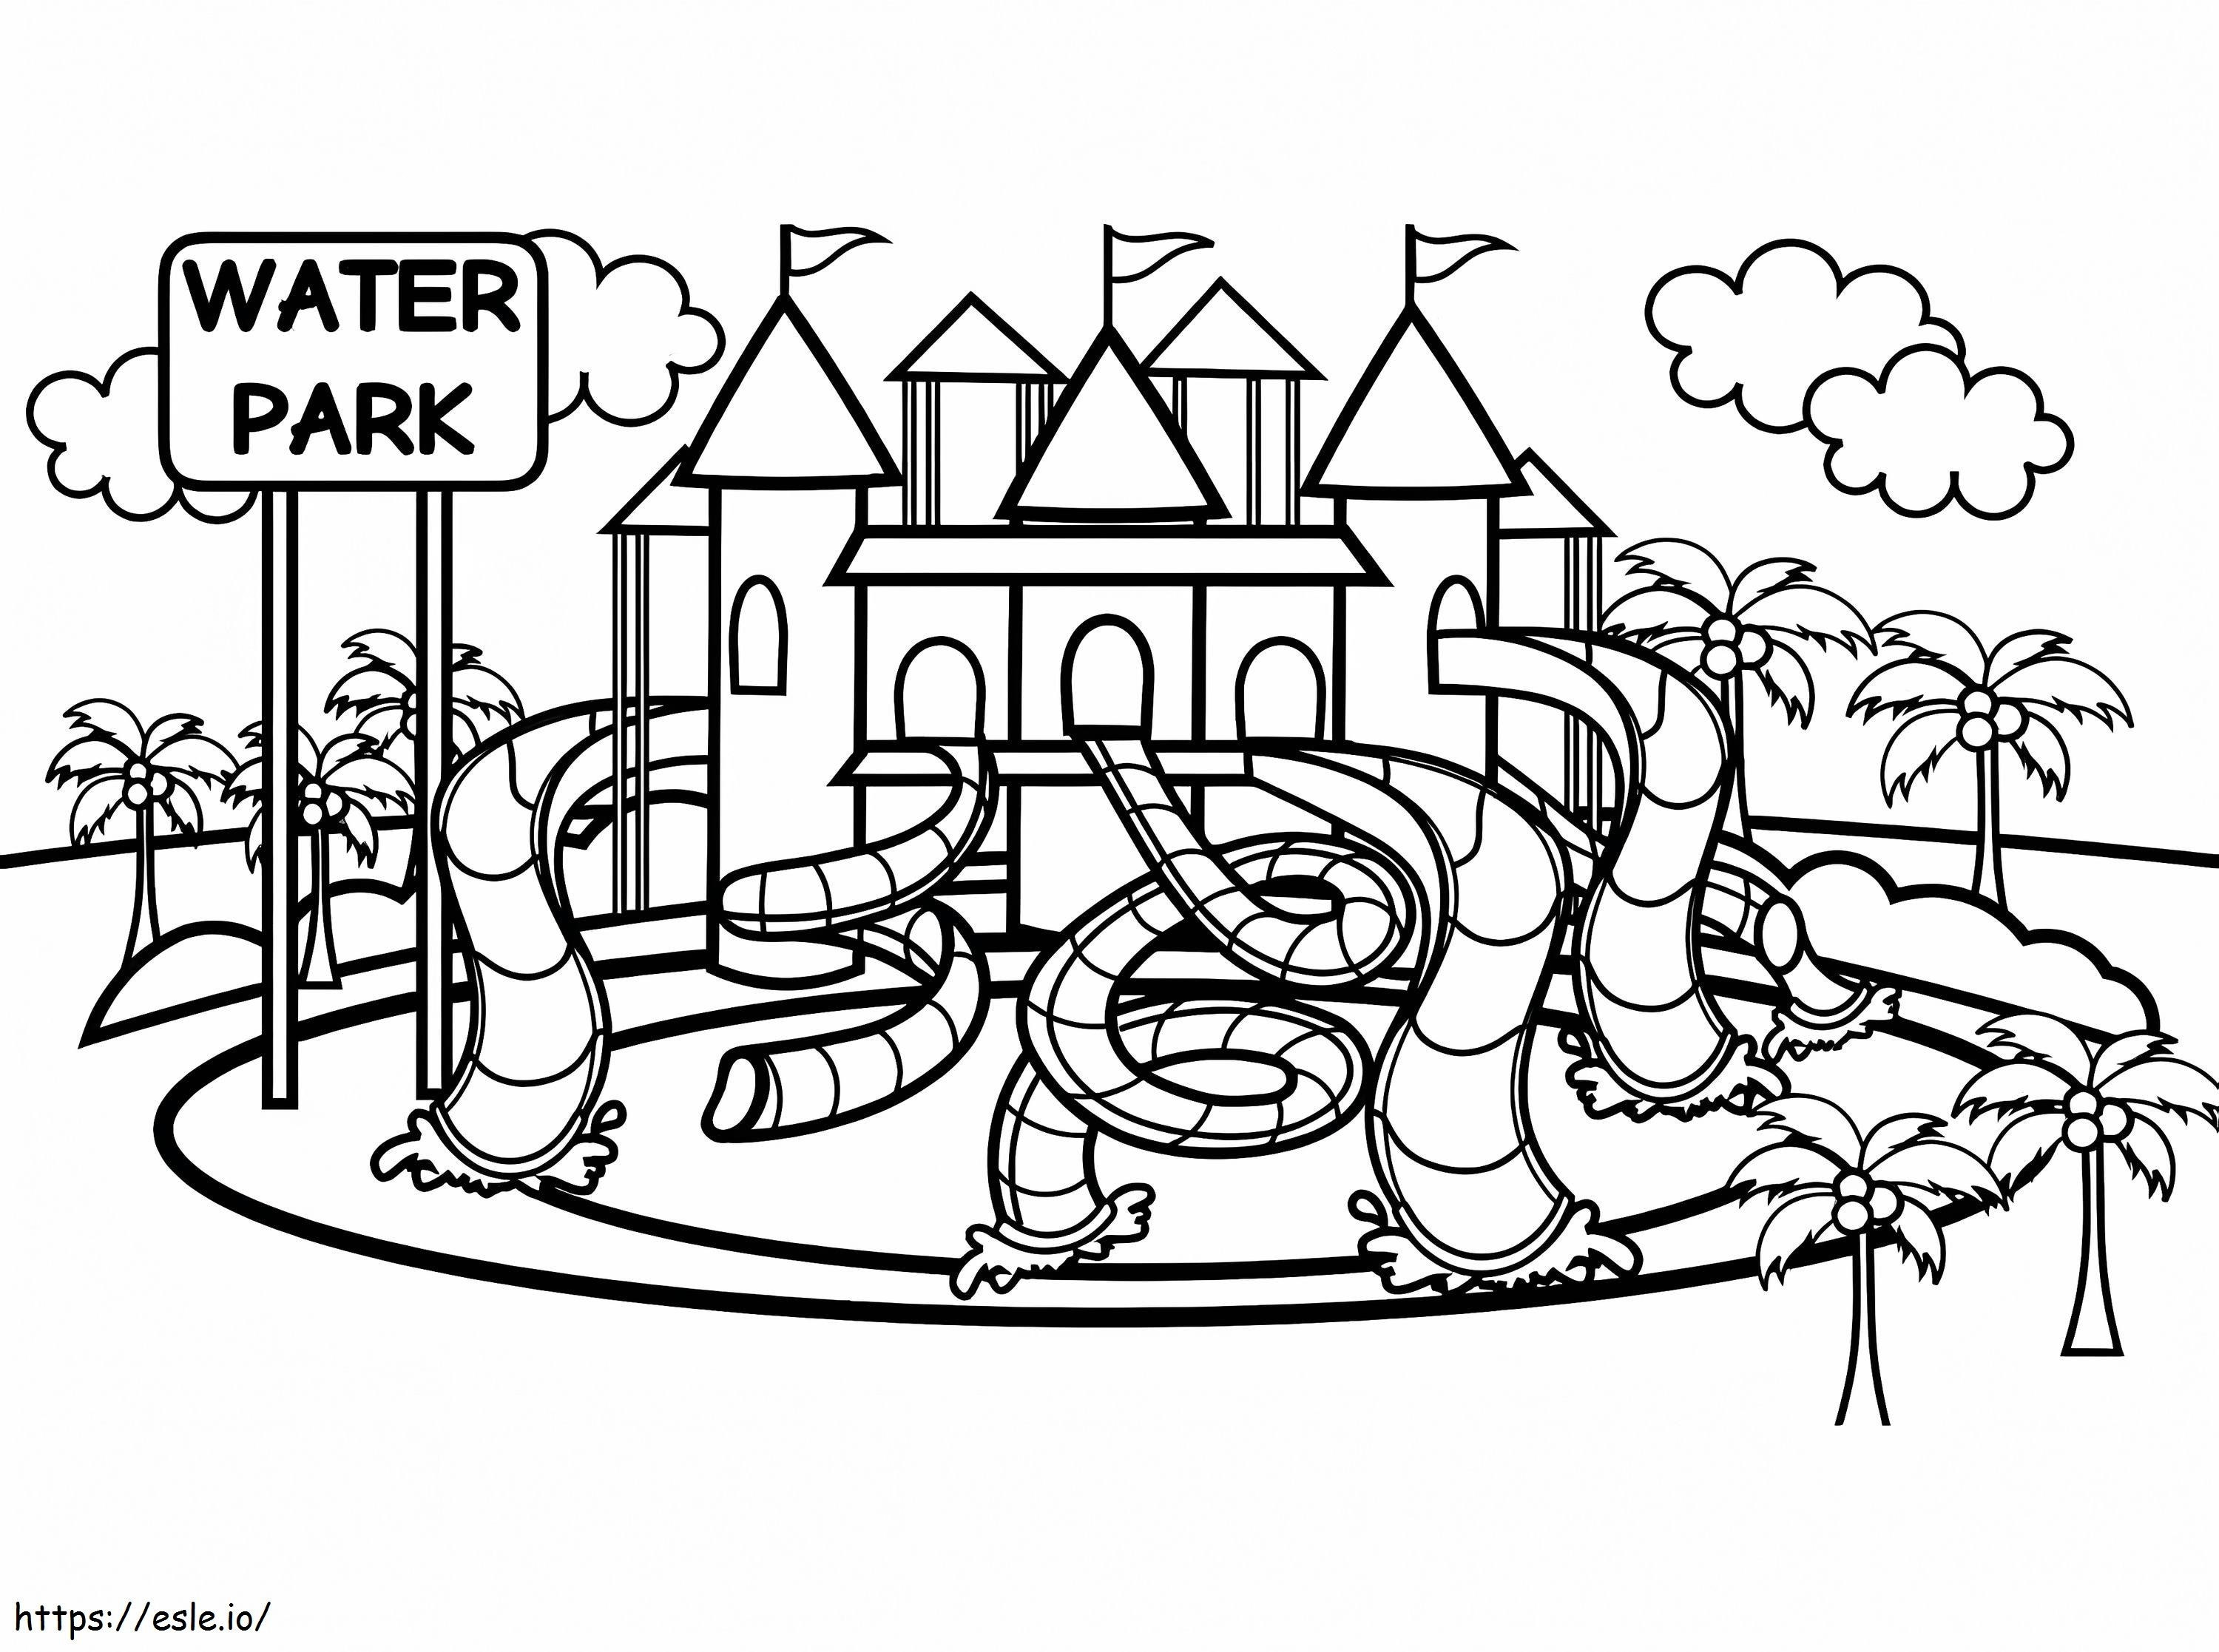 Water Park coloring page